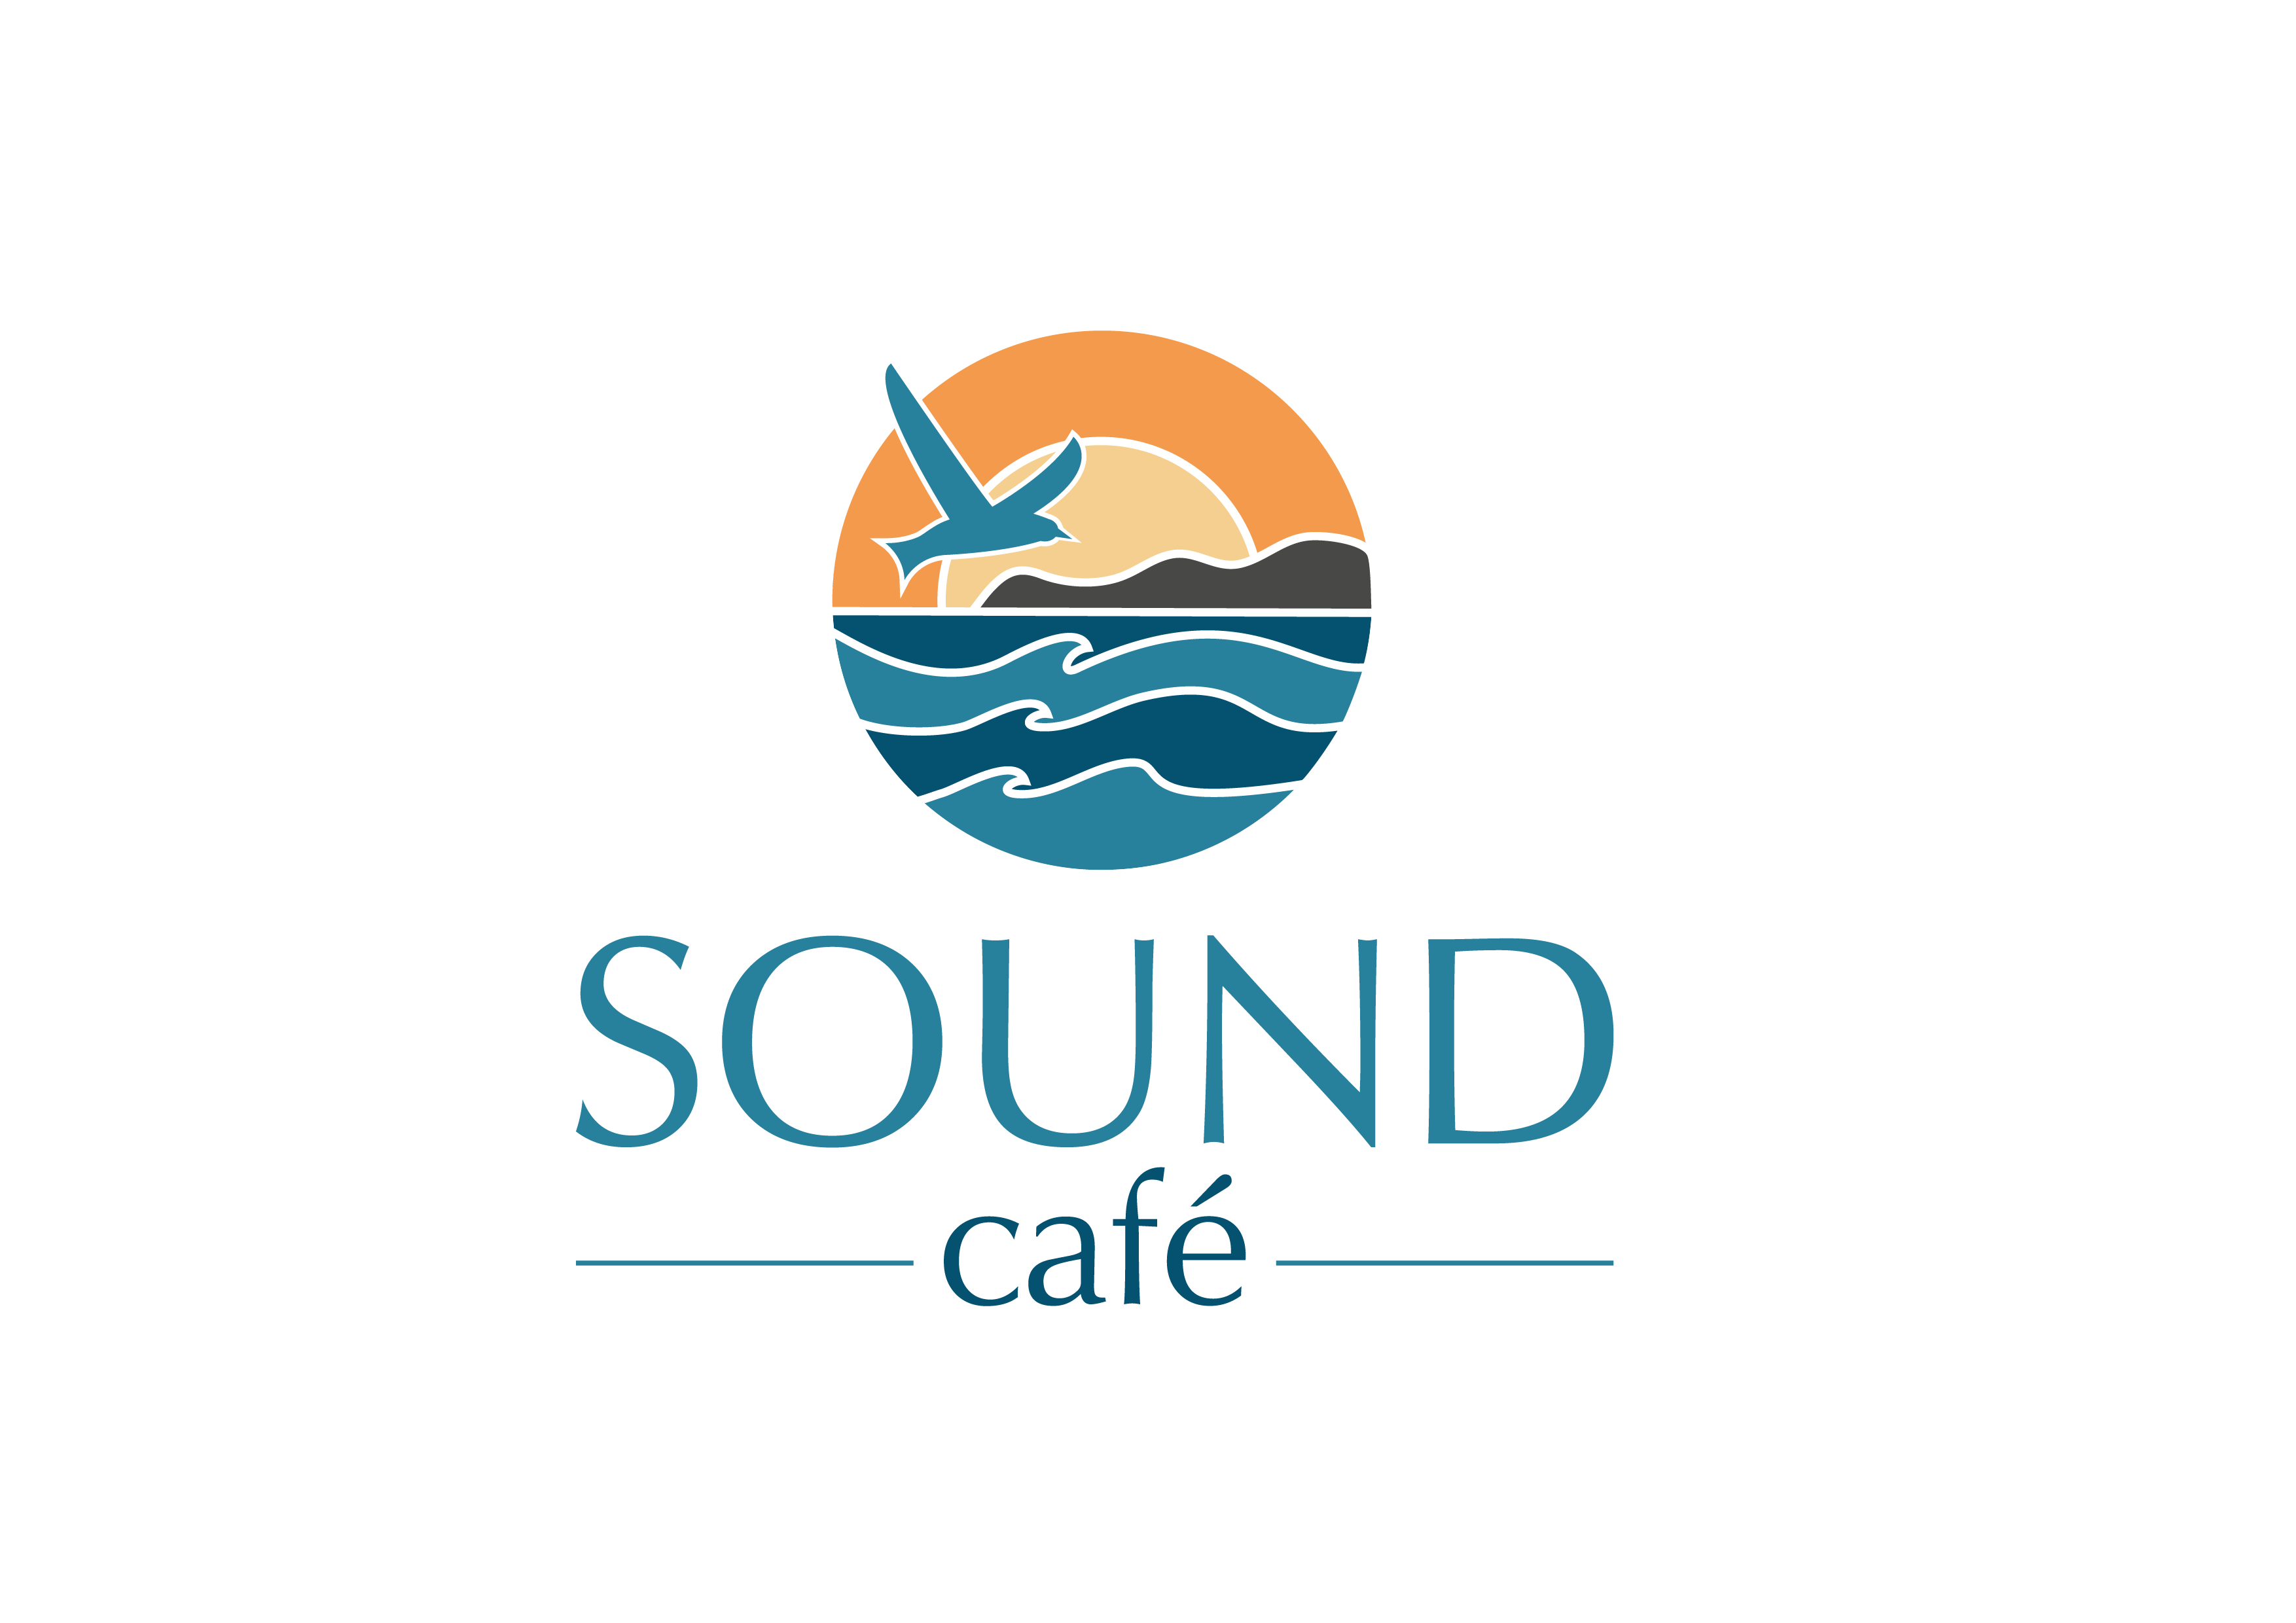 The Cafe at the Sound Logo